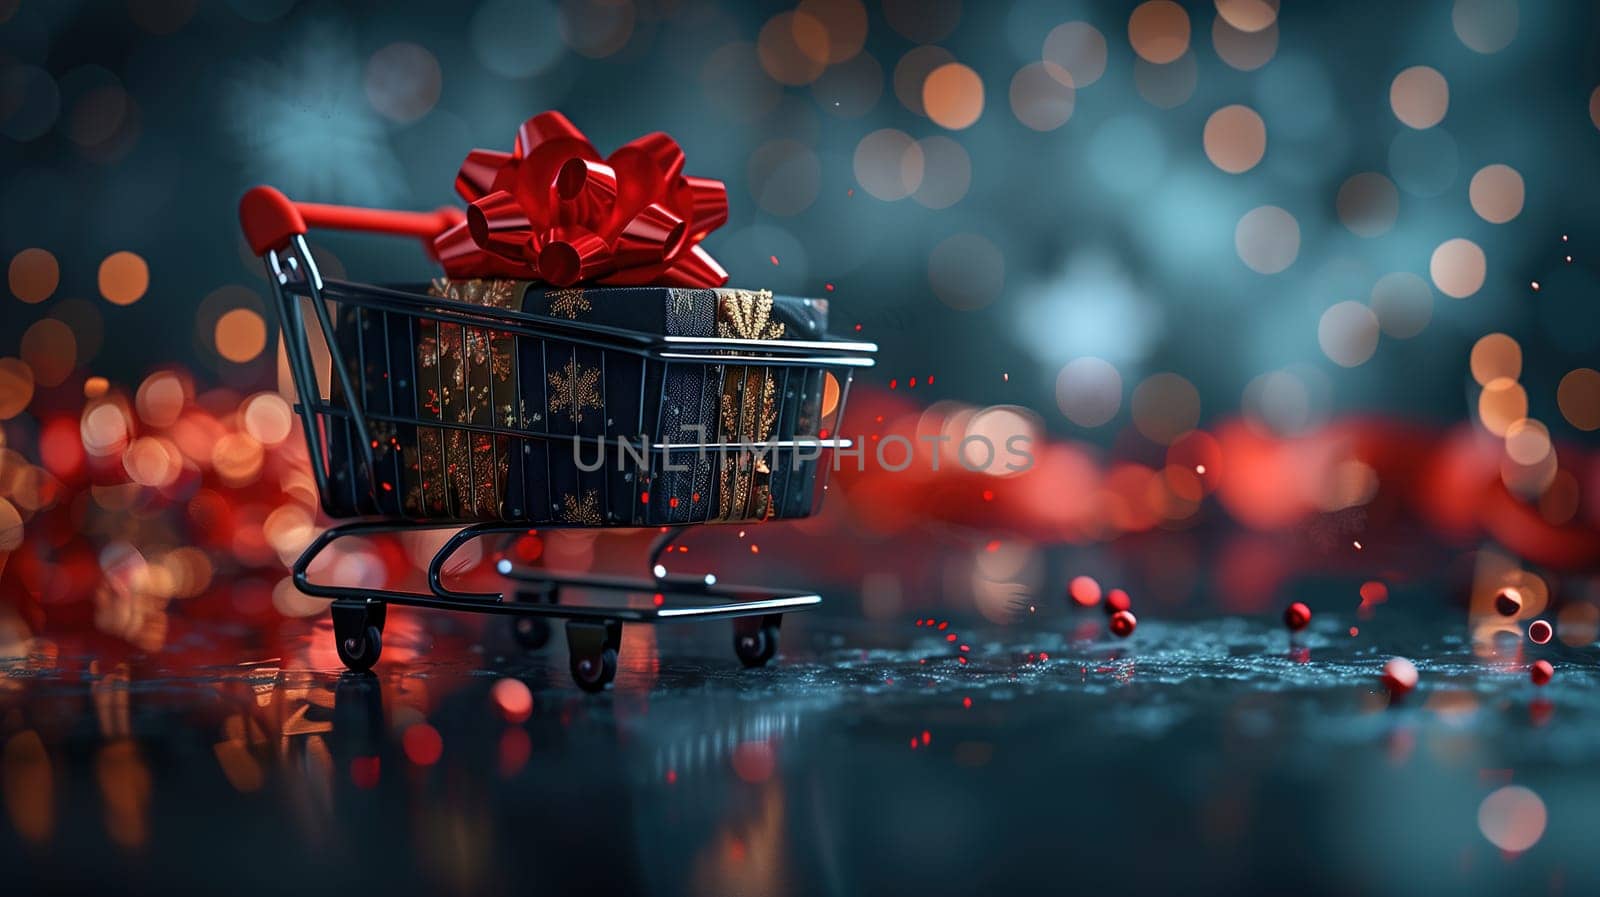 A shopping cart with a vibrant red bow tied on top of it, symbolizing a festive and celebratory atmosphere. The cart is positioned against a neutral background, drawing attention to the eye-catching bow.